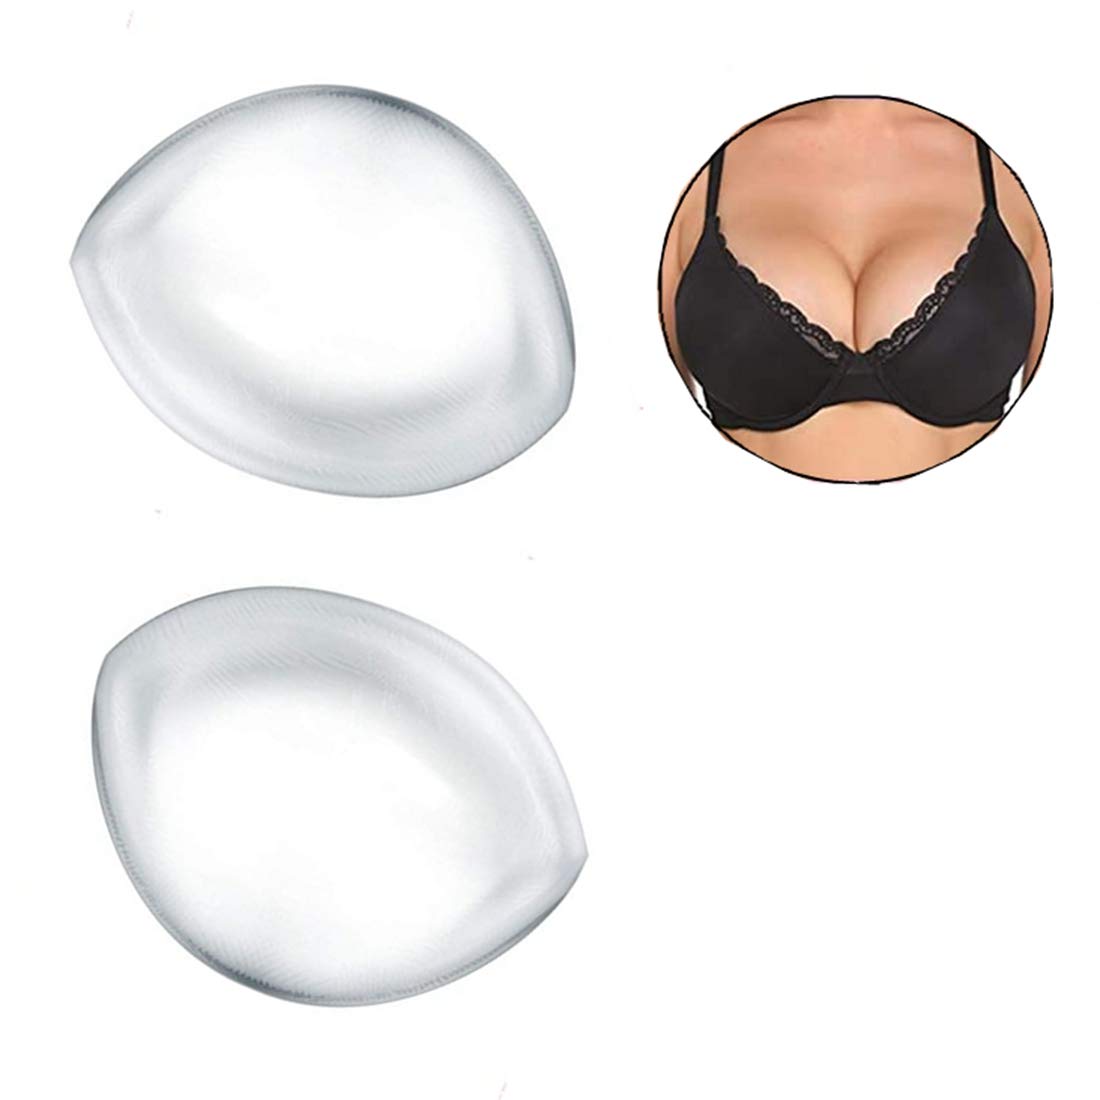 Silicone Bra Inserts, Gel Breast Pads to Enhance Cleavage, Bra Inserts Push  Up, Add 1-2 Cups, Suitable for Bras/Dresses/Suspenders/Swimsuits